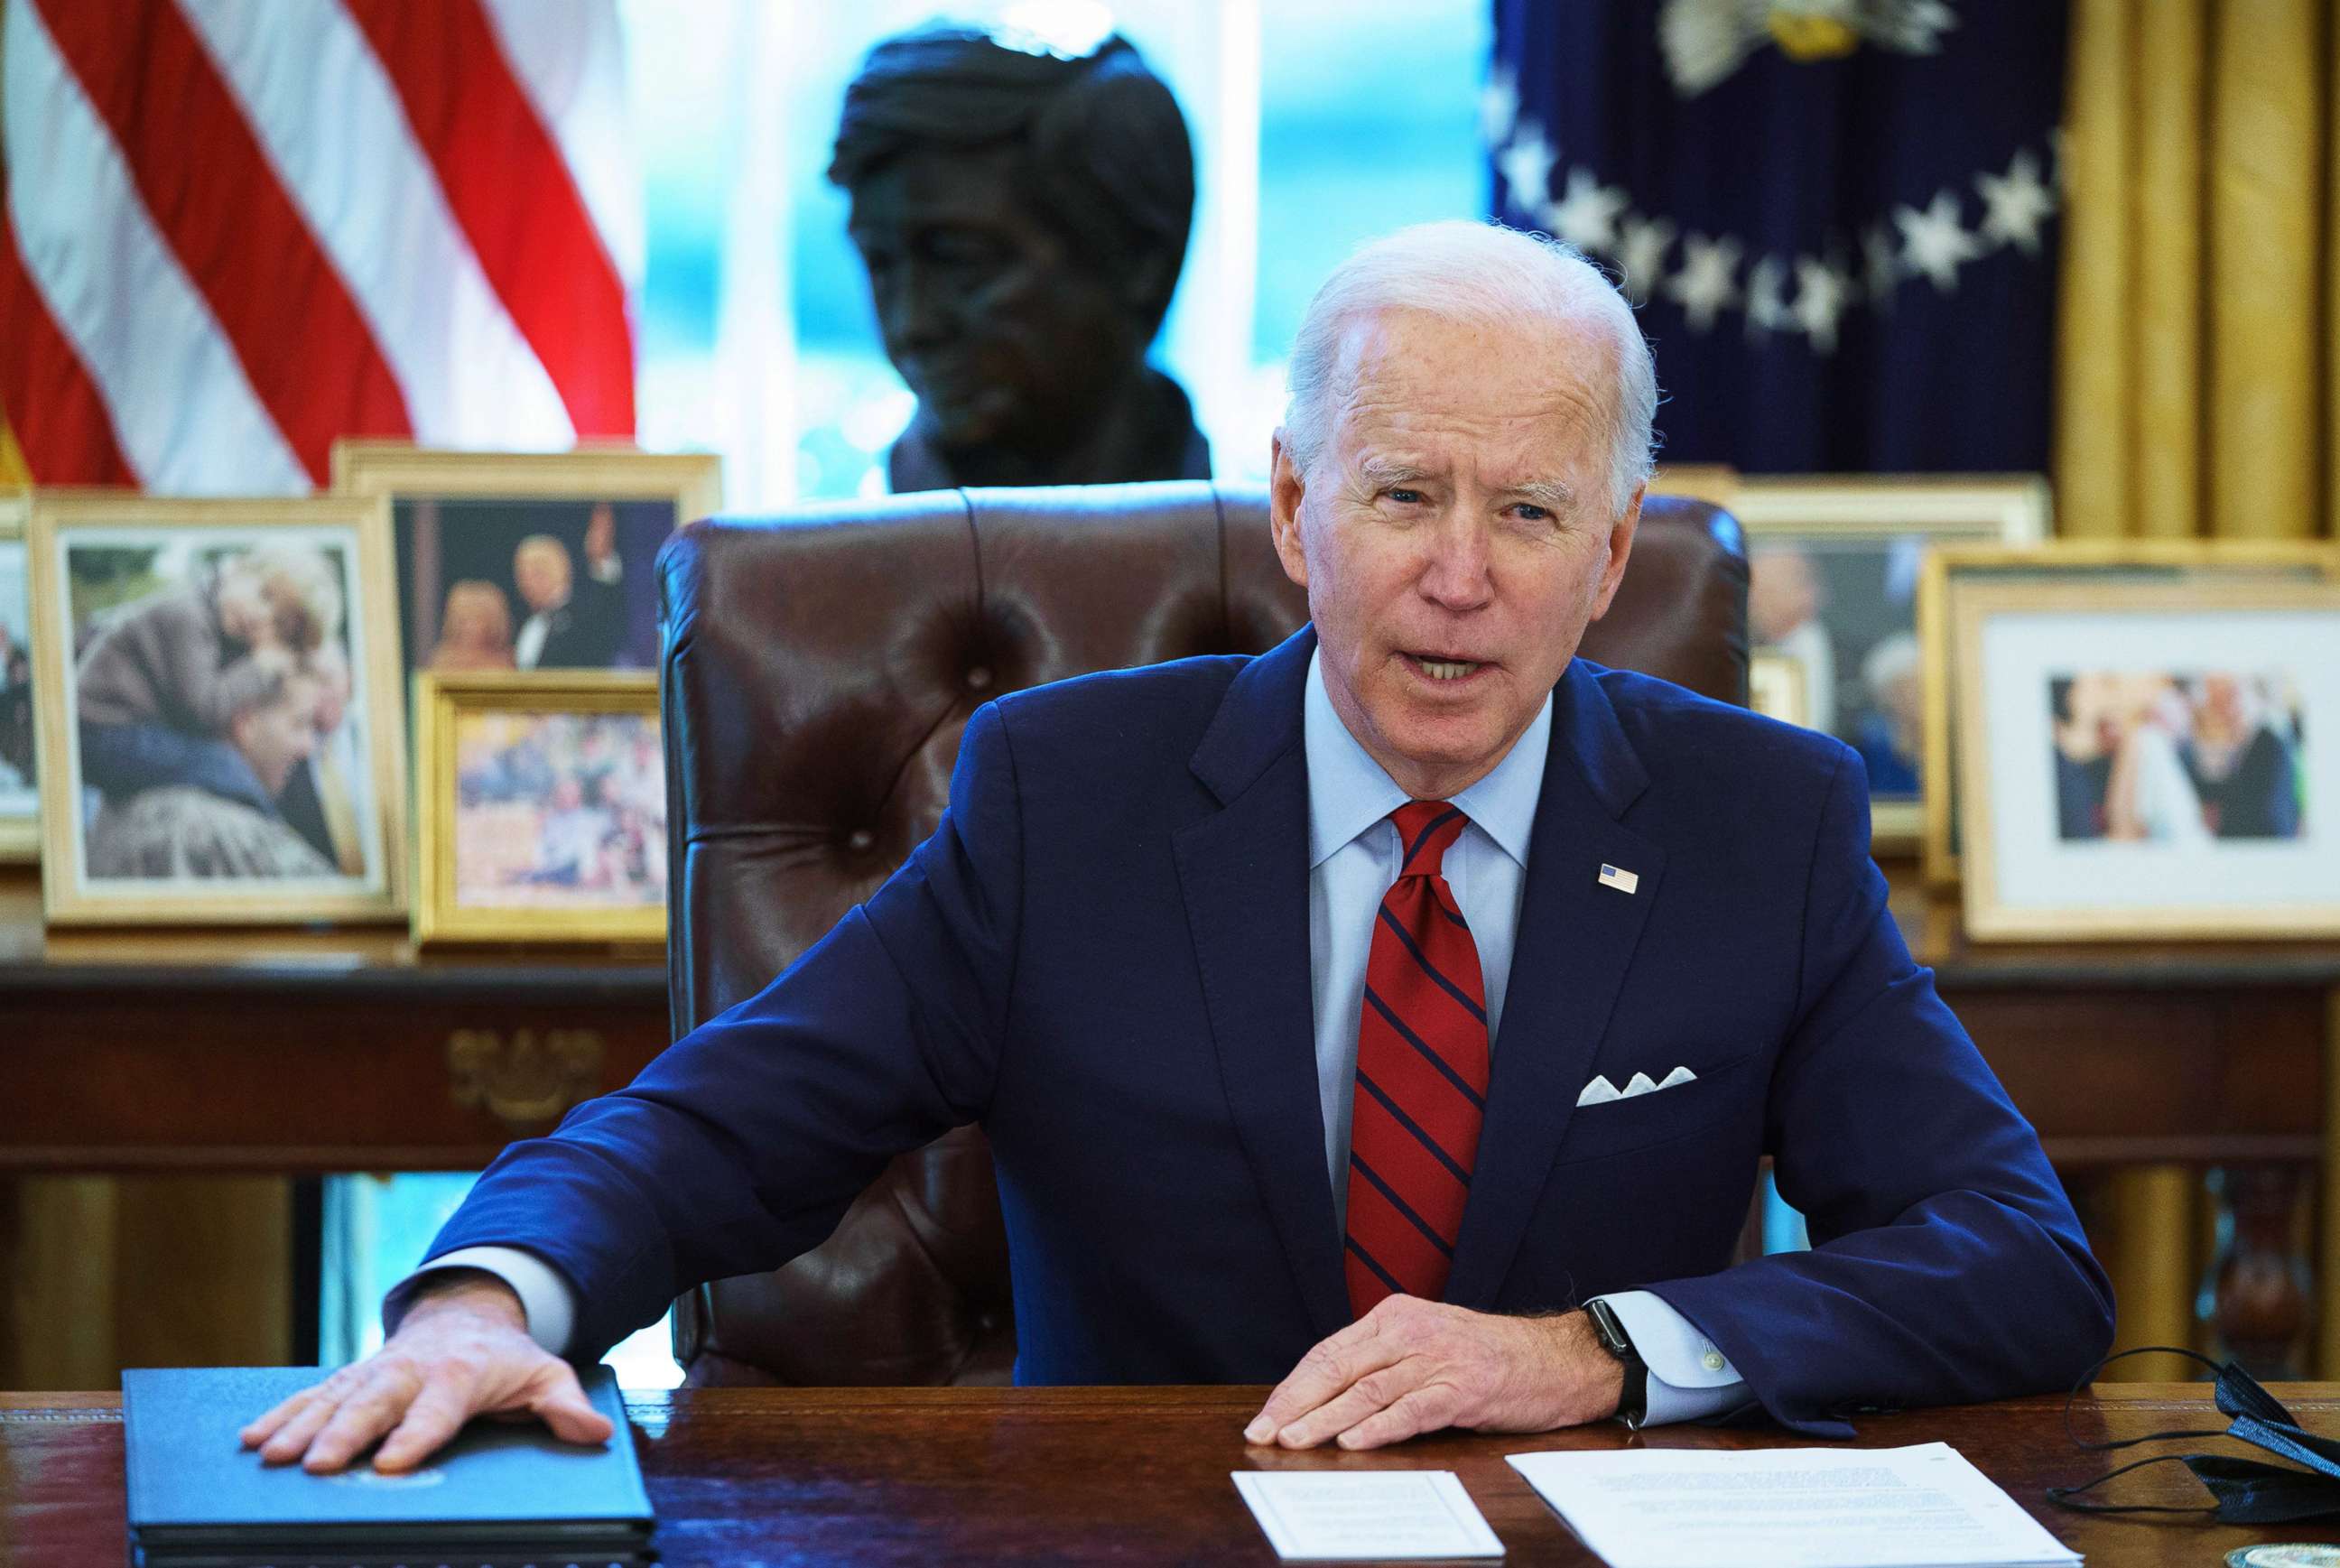 PHOTO: President Joe Biden speaks before signing executive orders on health care, in the Oval Office of the White House in Washington on Jan. 28, 2021.